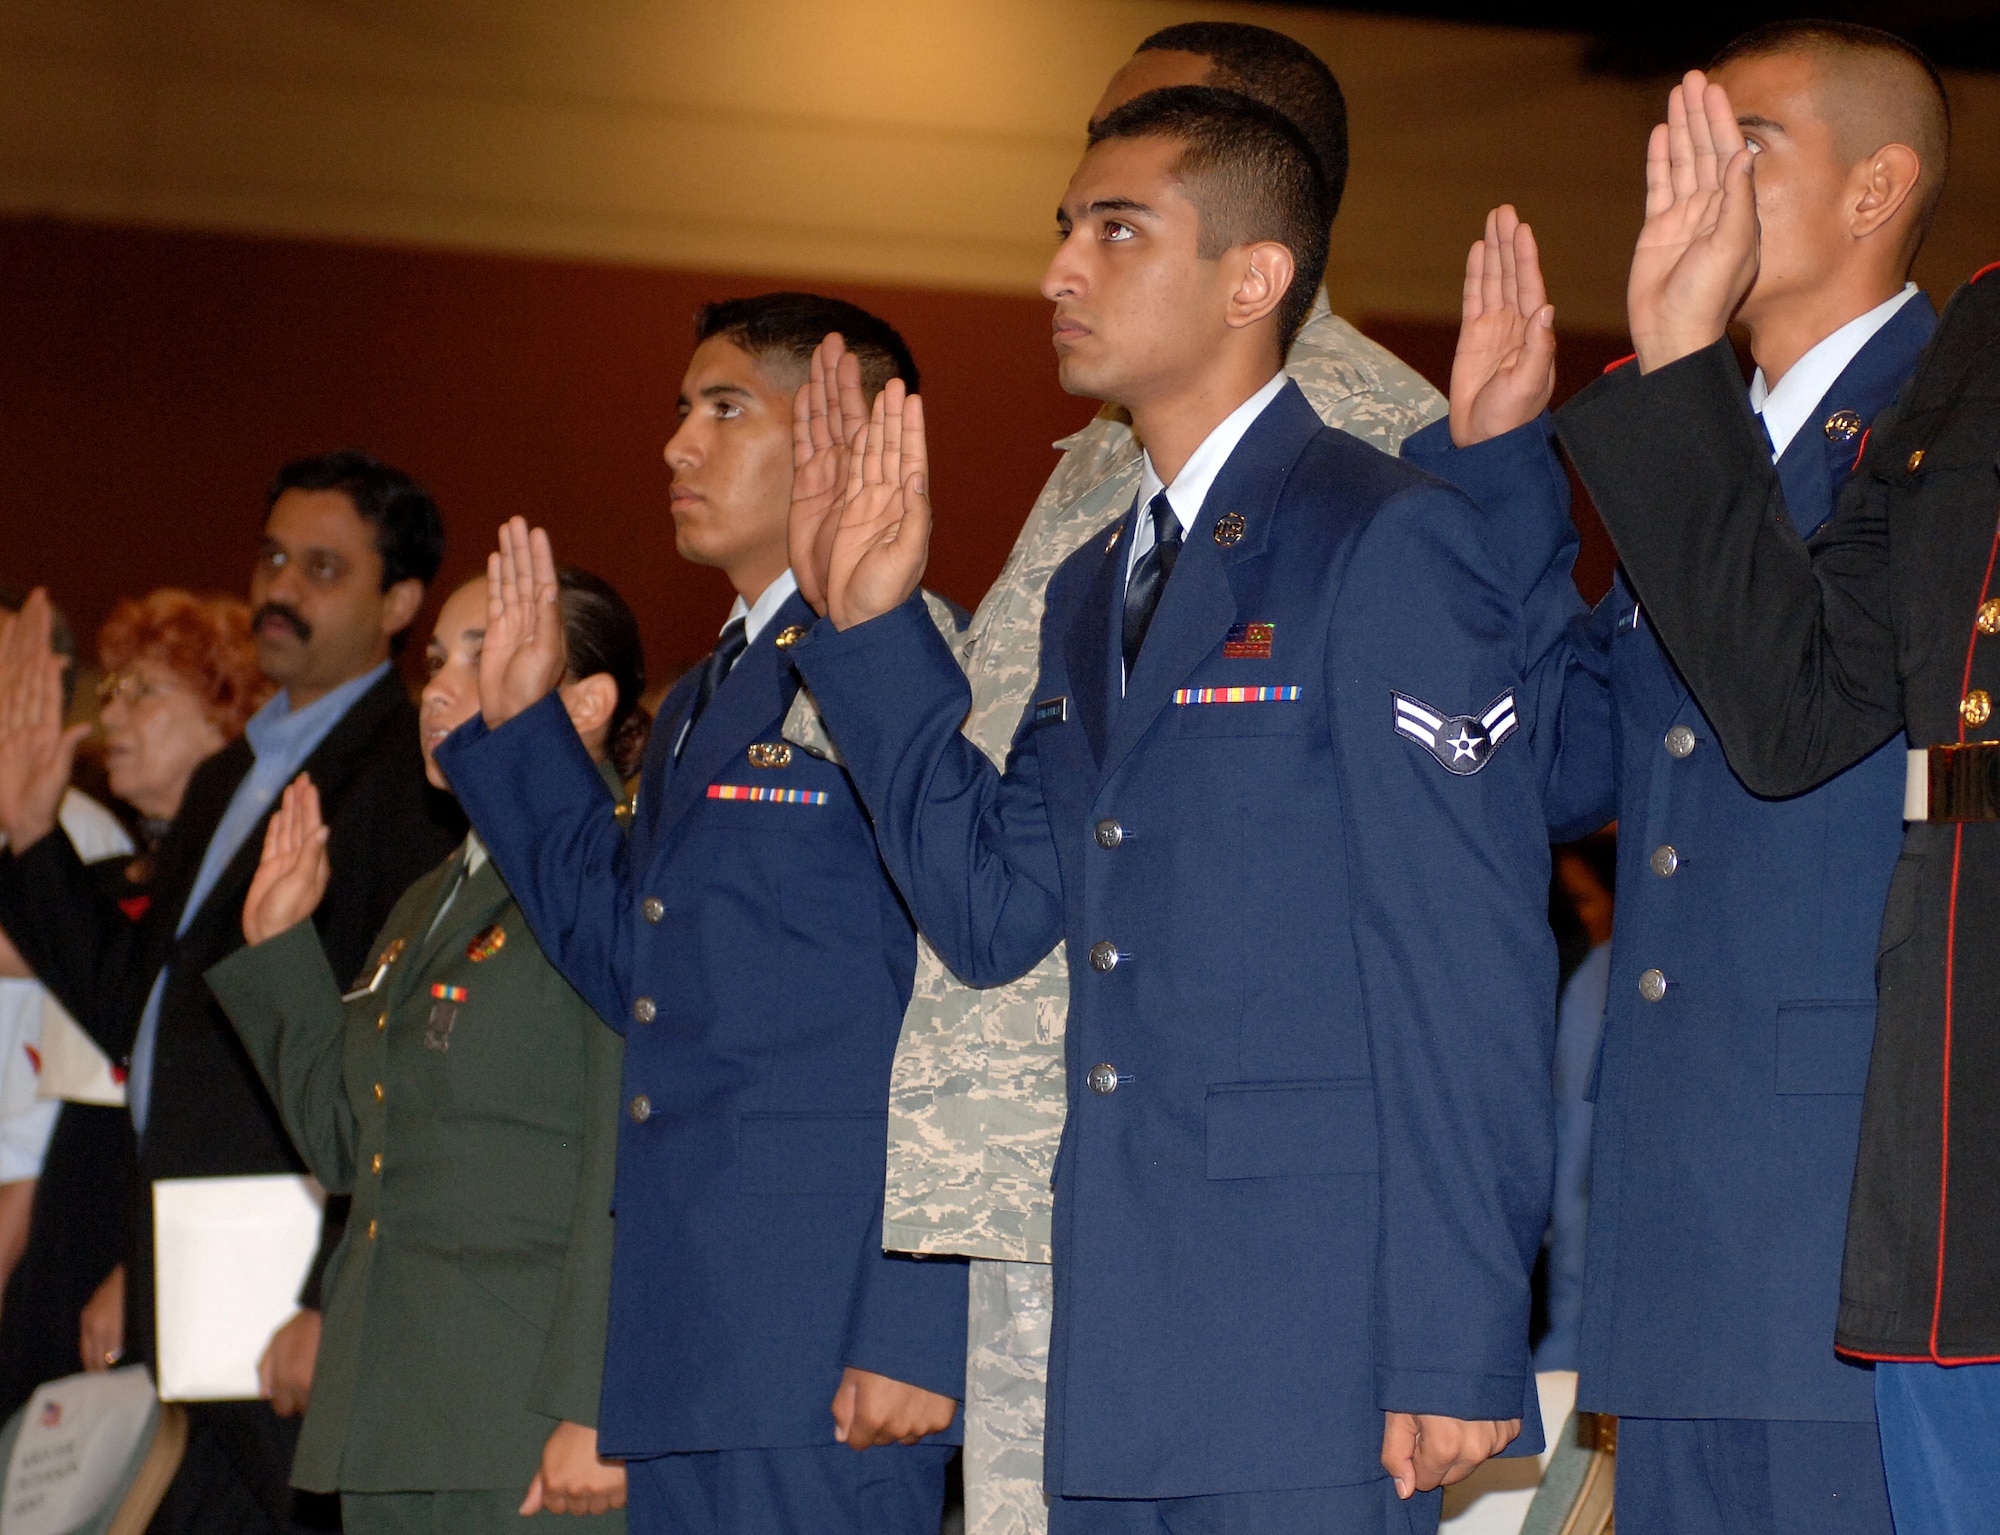 Four members from  Holloman Air Force Base, N.M., take the oath of allegance, along with 17 other servicemembers, during a naturalization ceremony, September 24. More than 1,200 applicants were granted U.S. citizenship at the Convention and Performing Arts Center that was transformed into a federal court room in El Paso, Texas  (U.S. Air Force photo/Airman 1st Class Michael Means)